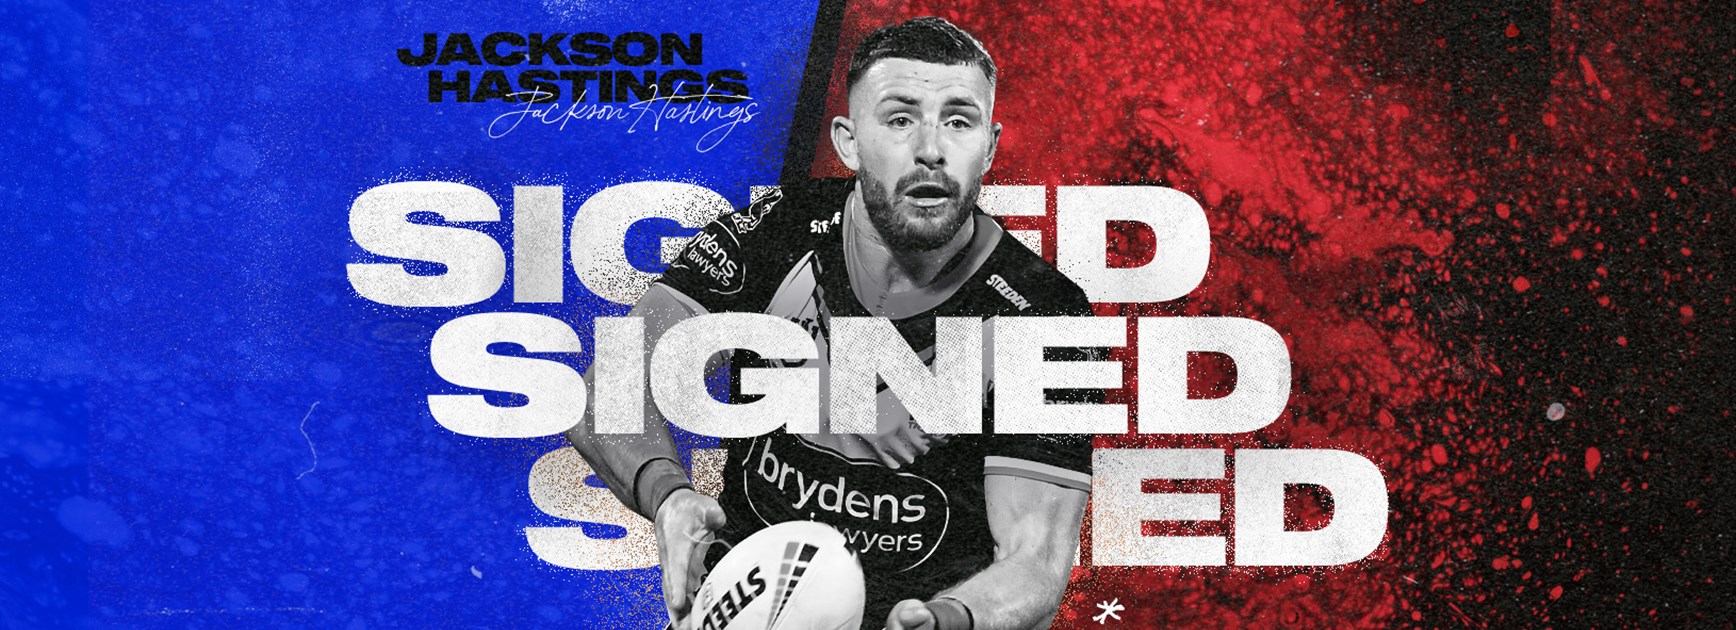 Knights sign Jackson Hastings